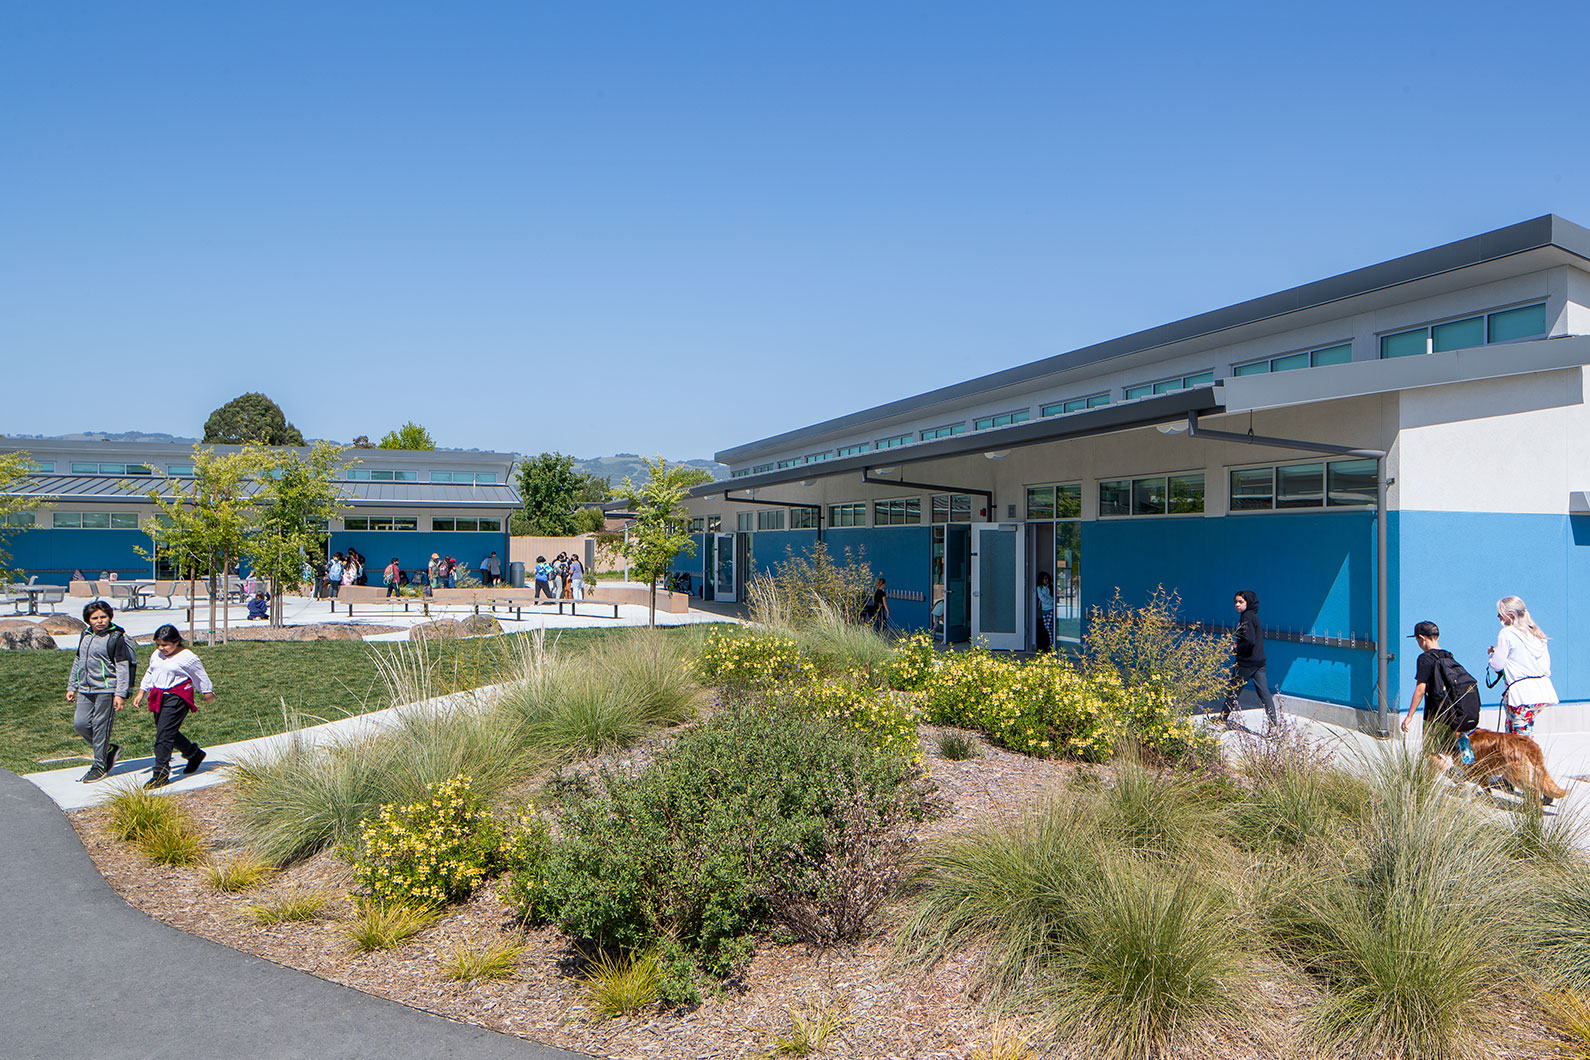 Central courtyard at Loma Vista Immersion Academy